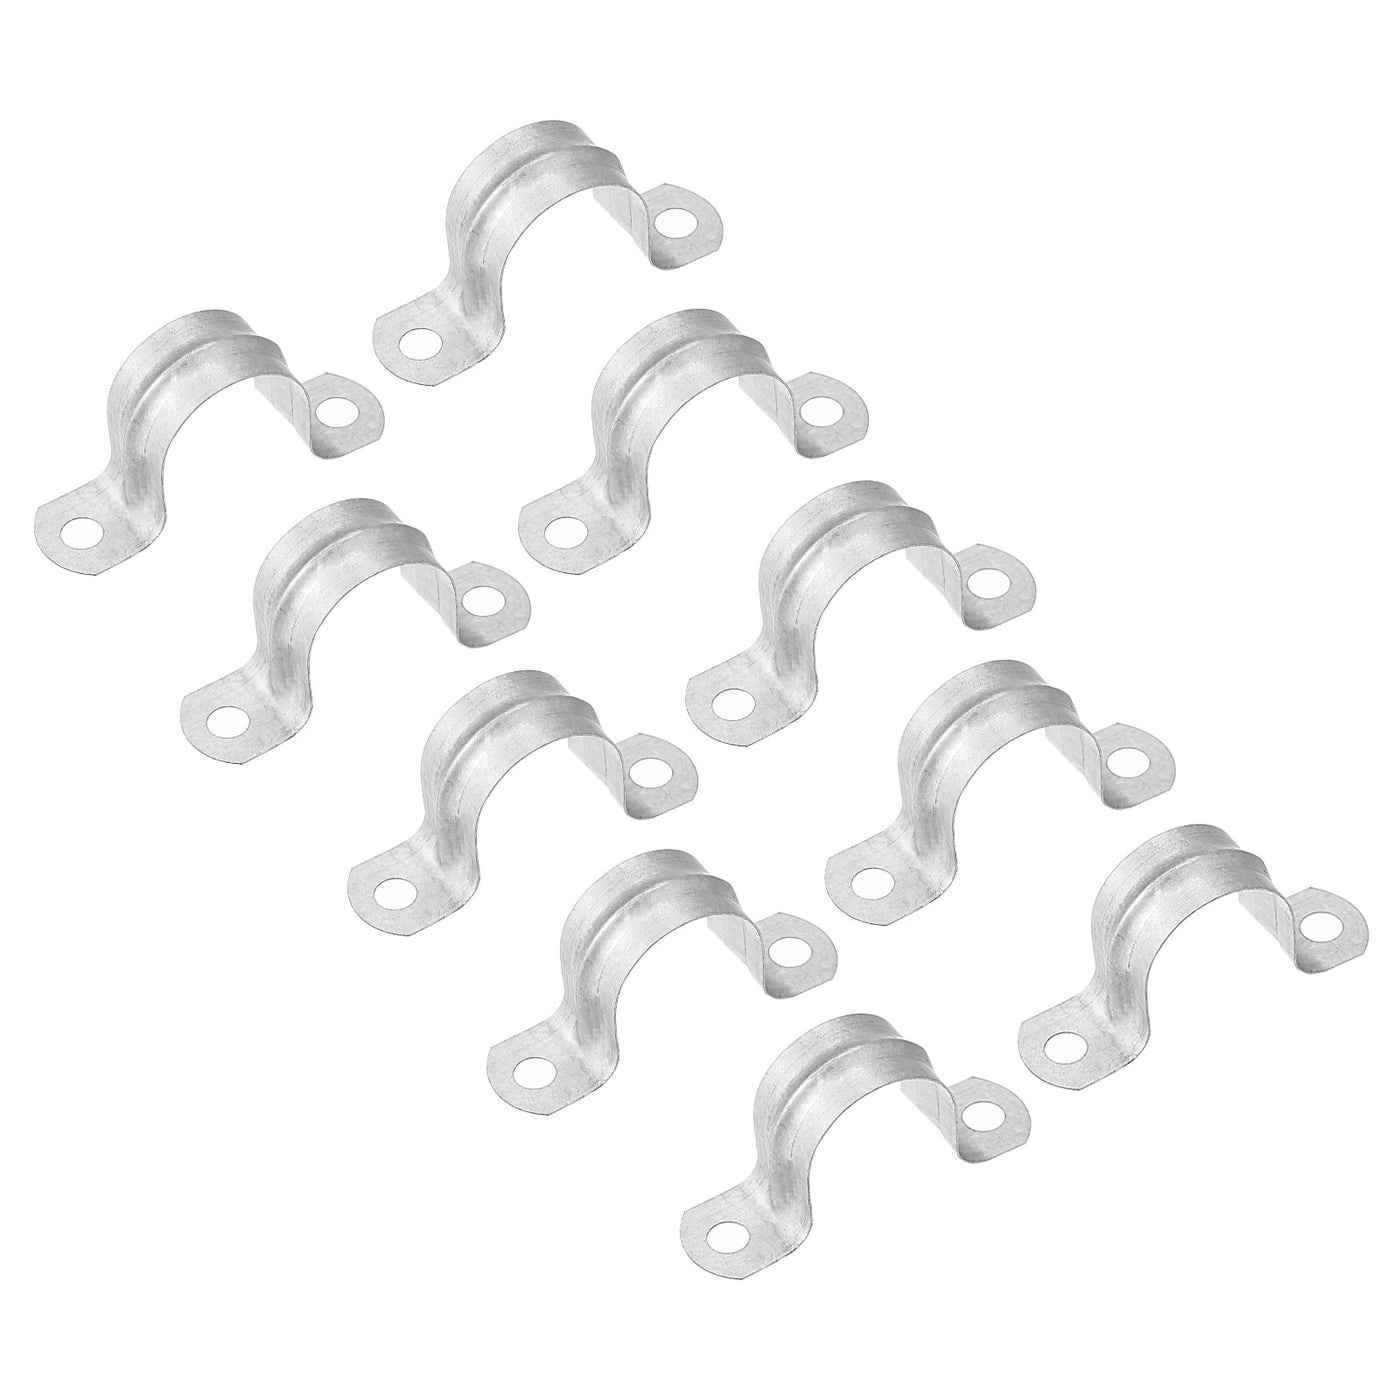 uxcell Uxcell Rigid Pipe Strap 24pcs 1" (25mm) Carbon Steel U Bracket Tension Tube Clamp